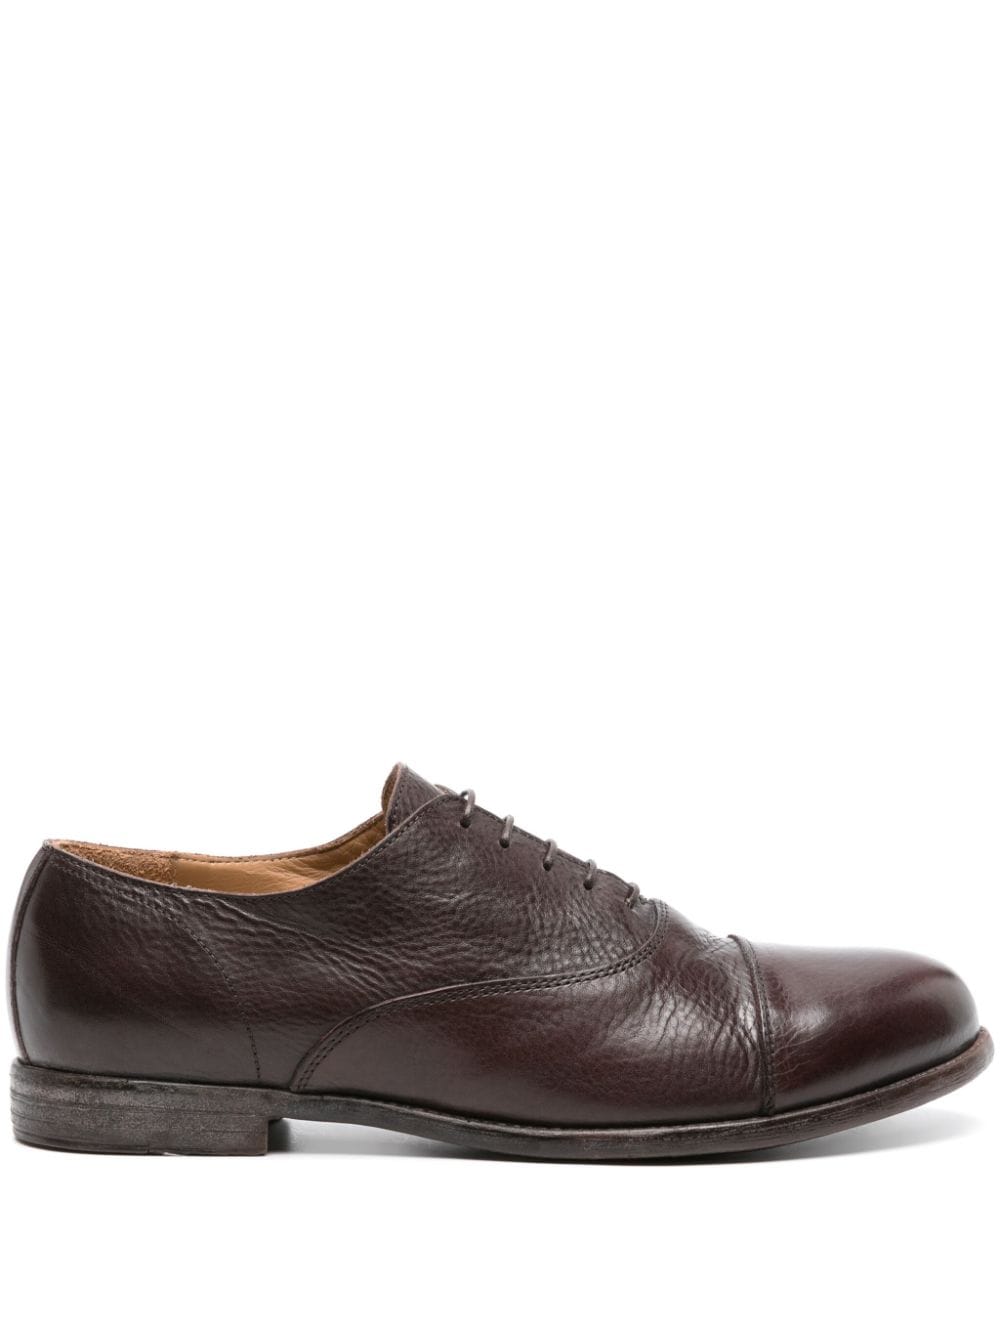 Moma grained-leather Oxford shoes - Brown von Moma